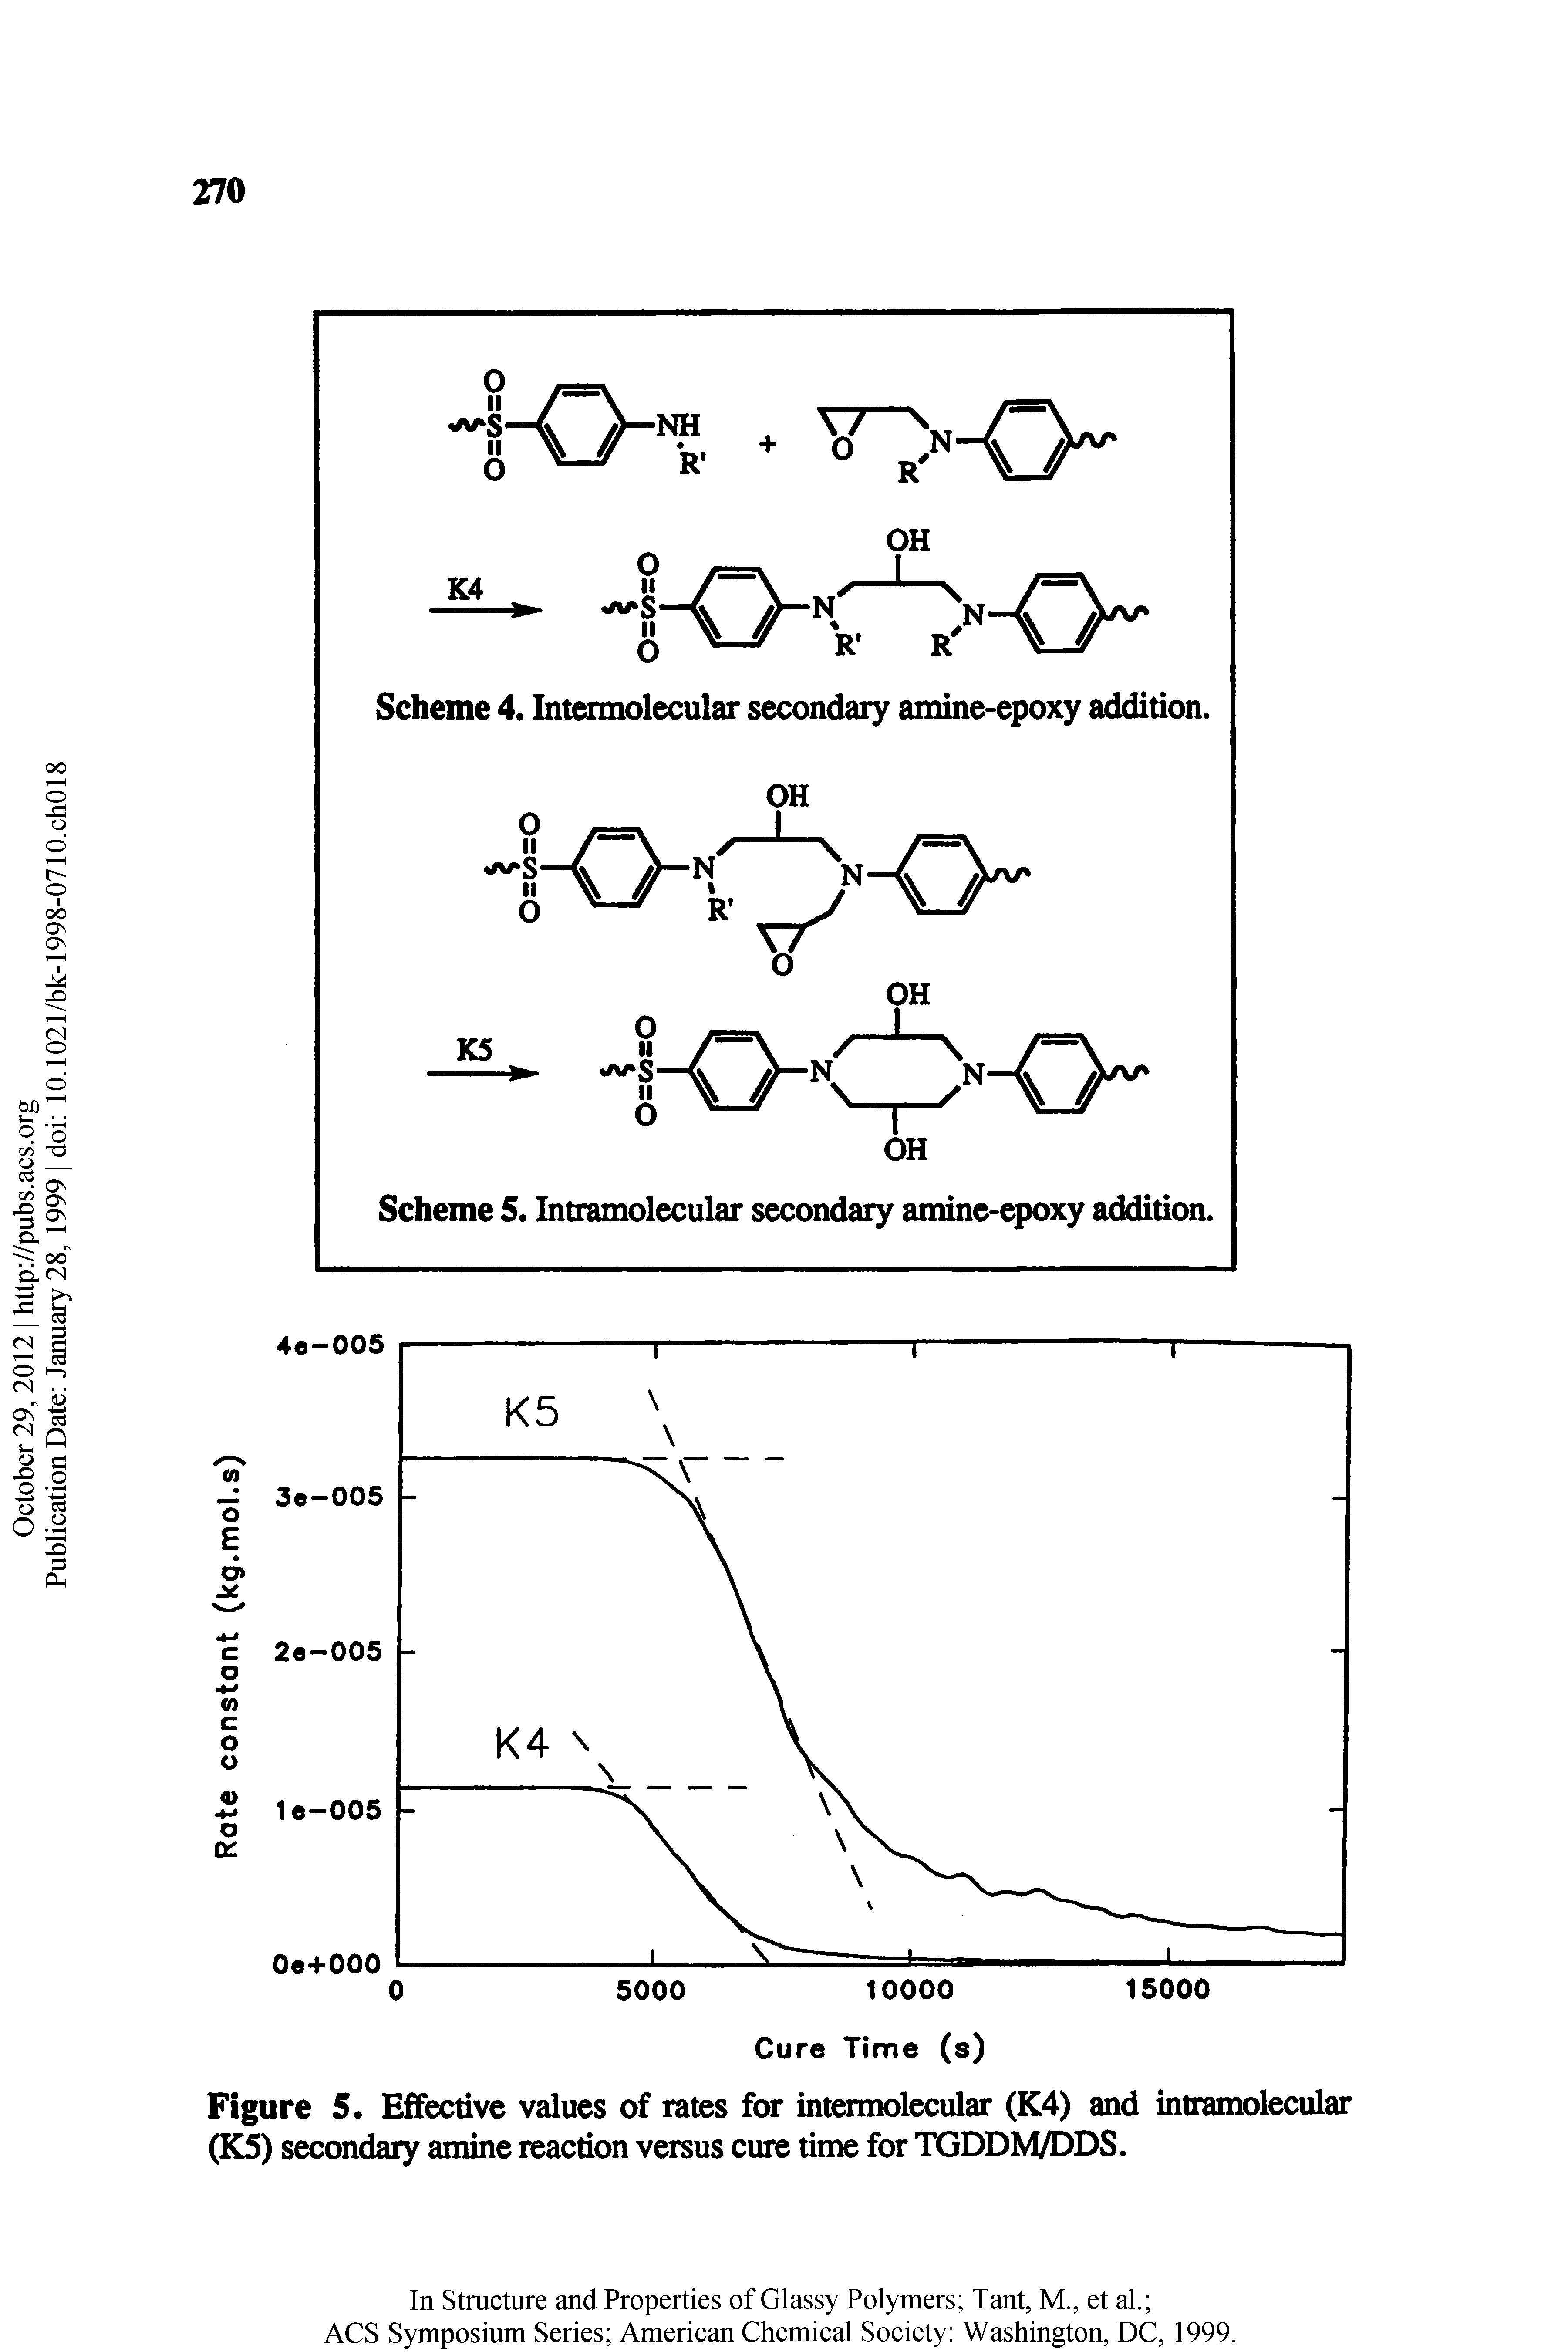 Figure 5. Effective values of rates for intermolecular (K4) and intramolecular (K5) secondary amine reaction versus cure time for TGDDM/DDS.